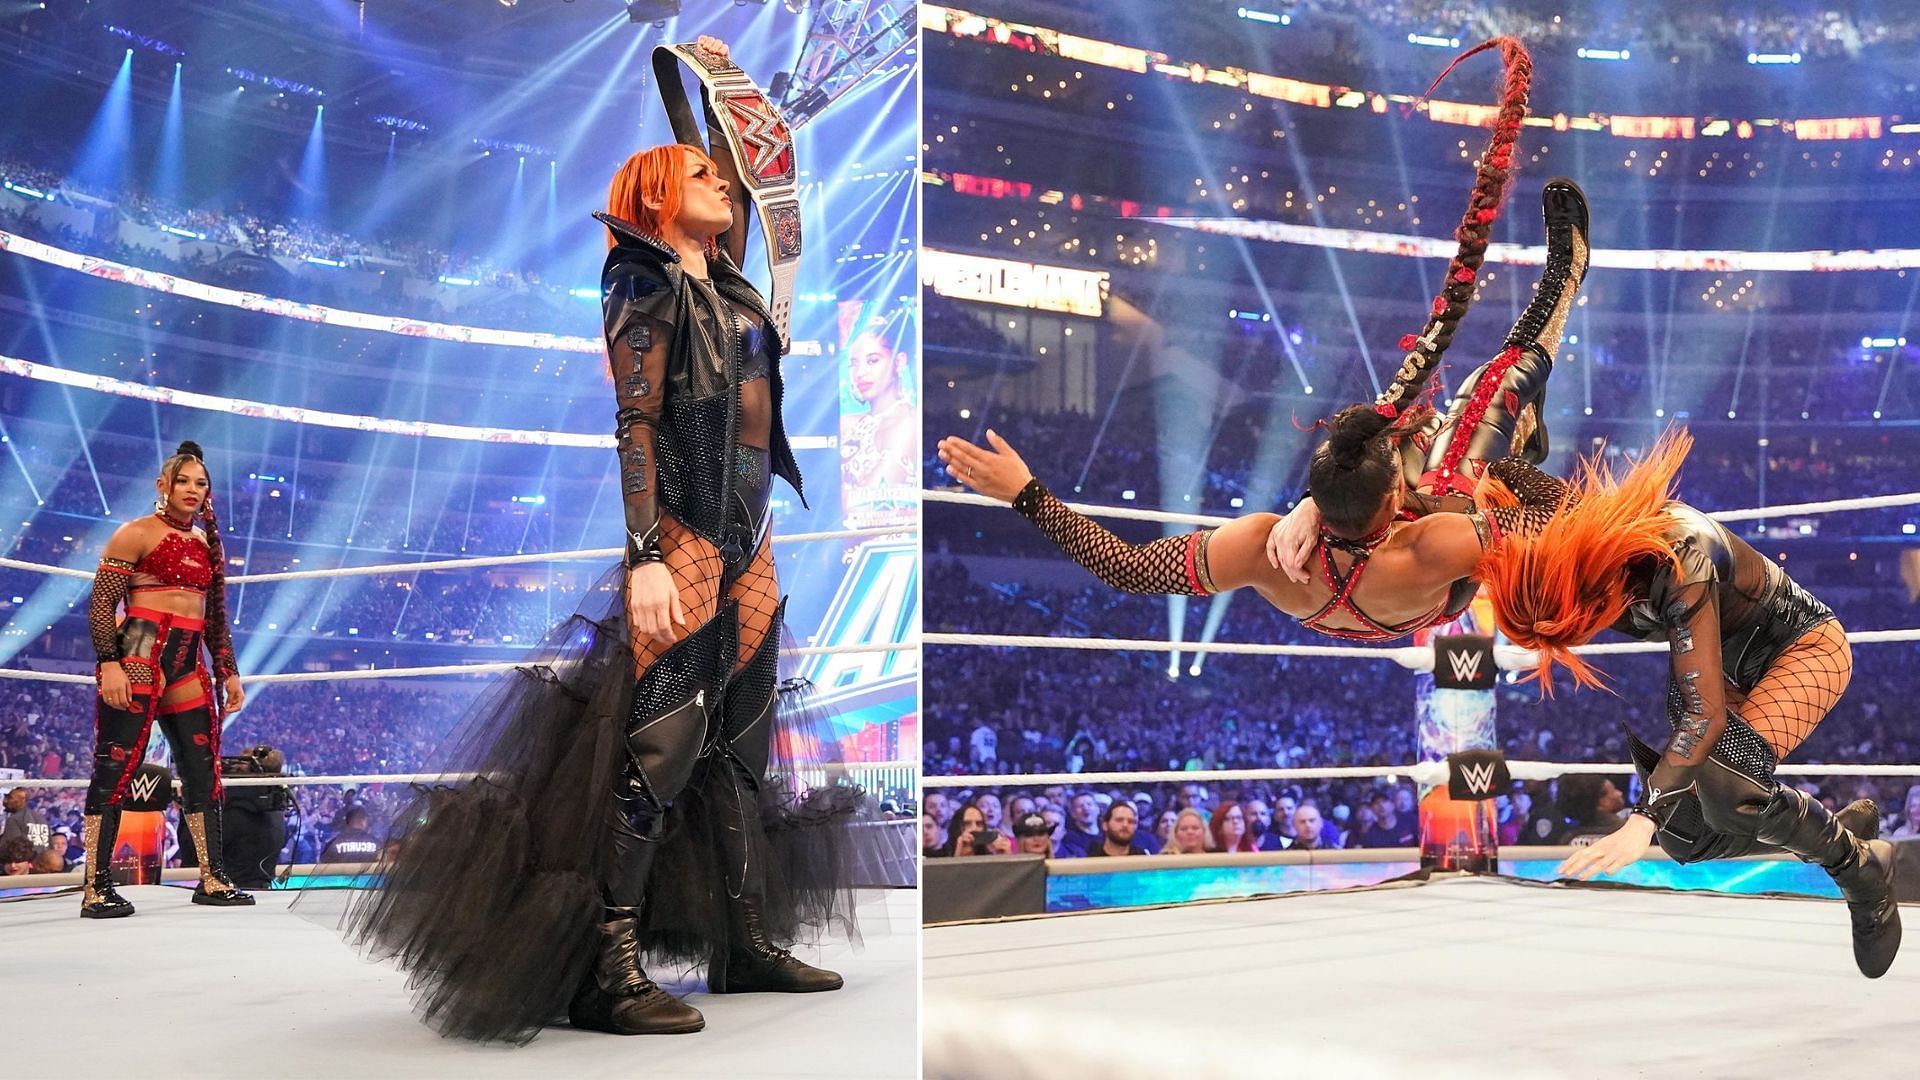 Bianca Belair dethroned Becky Lynch at The Show of Shows